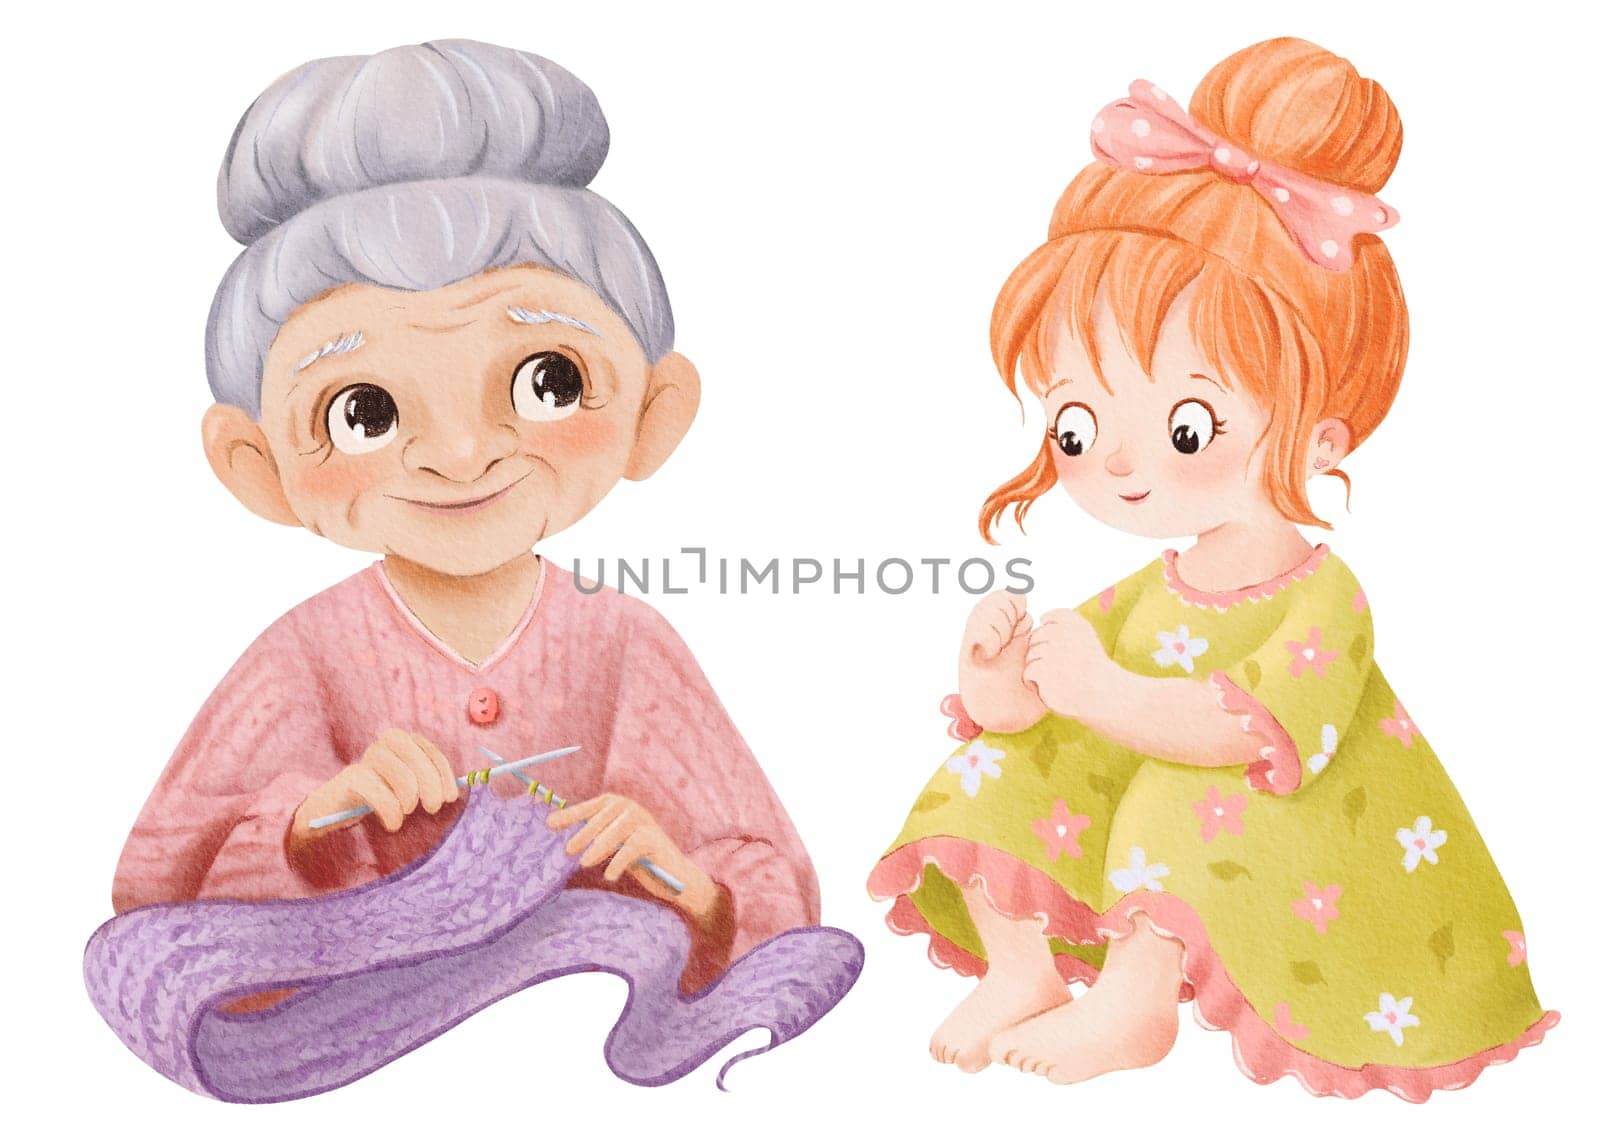 Watercolor character set. A grandmother knitting portrays. a cheerful little girl with big eyes. for children's book illustrations, family-themed designs, greeting cards, and storytelling visuals by Art_Mari_Ka